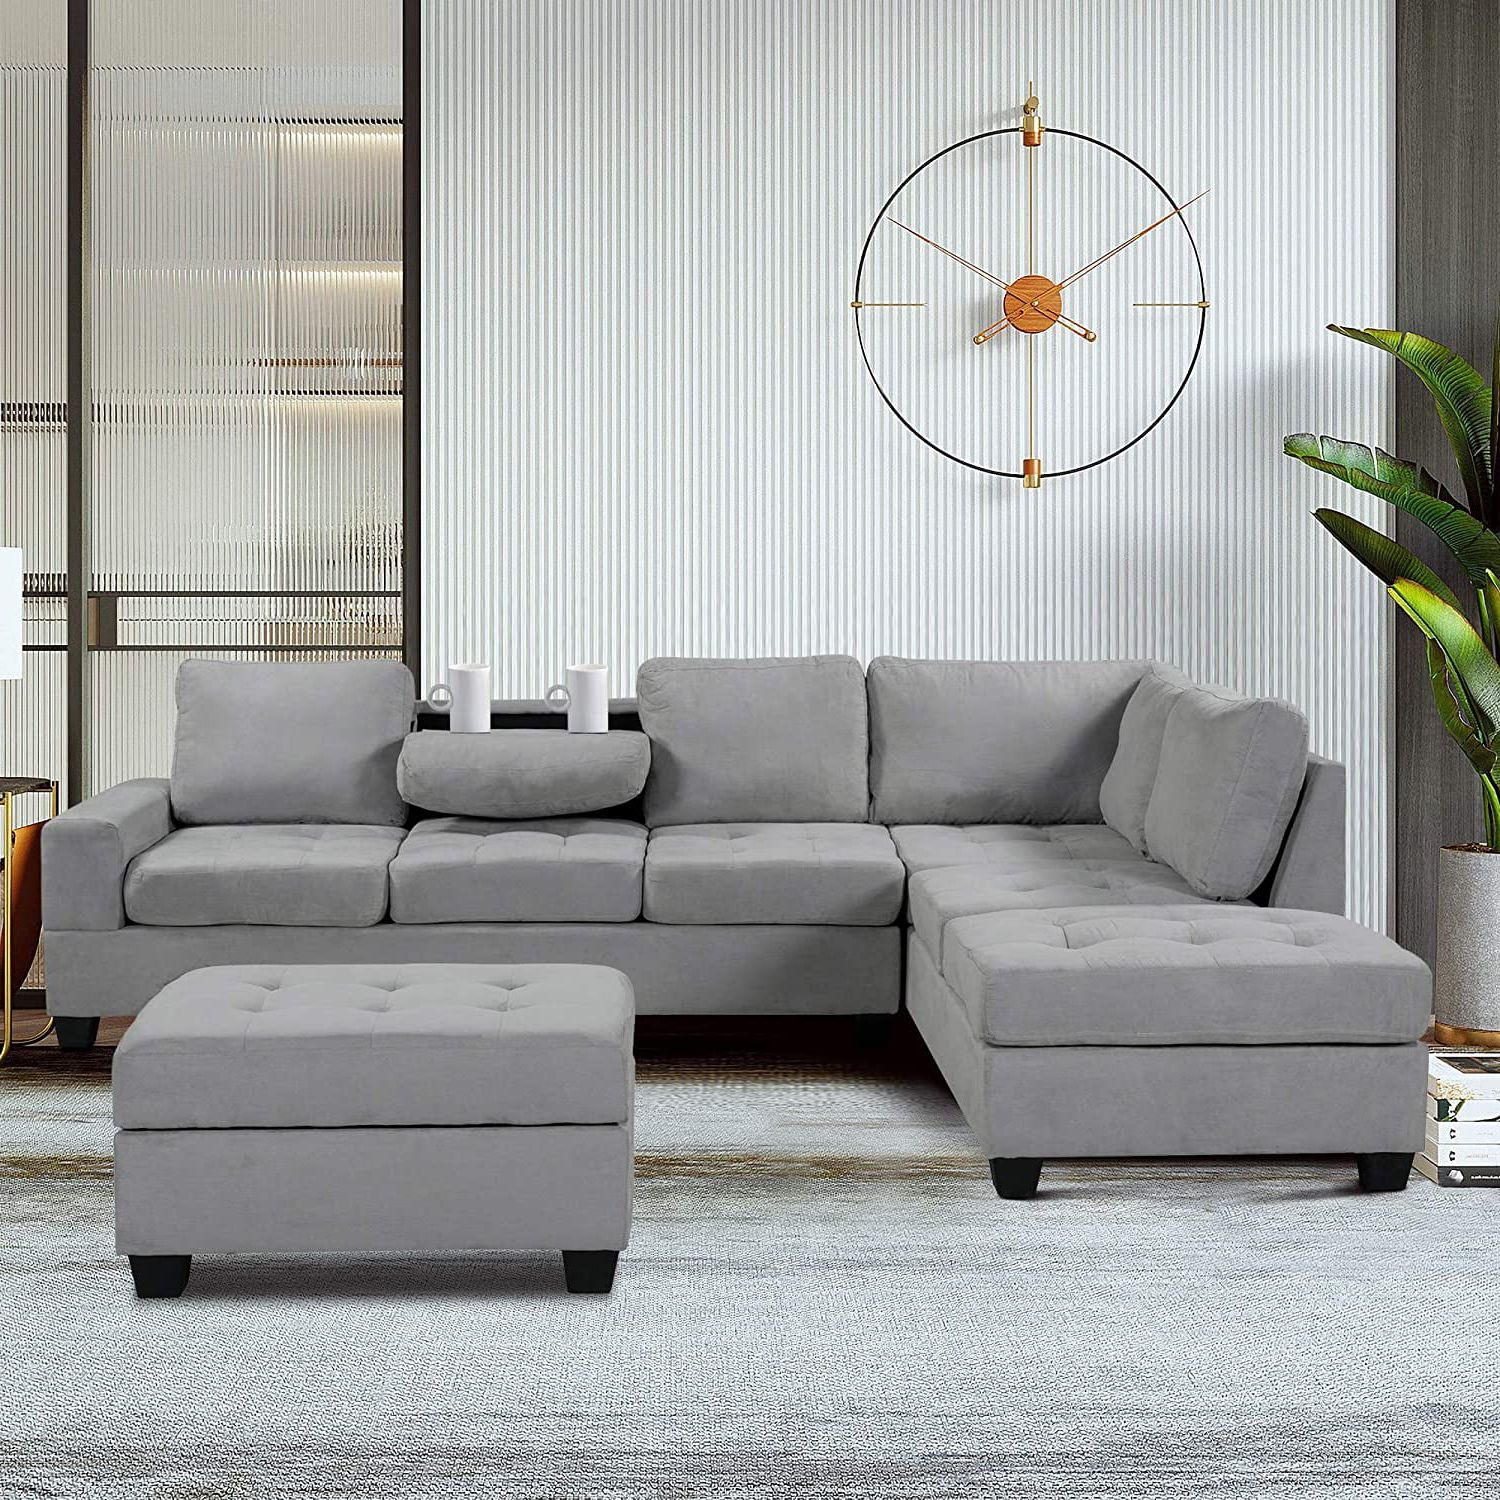 3 Seat Convertible Sectional Sofas In Famous 3 Piece Convertible Sectional Sofa L Shaped Couch With Reversible (View 8 of 15)